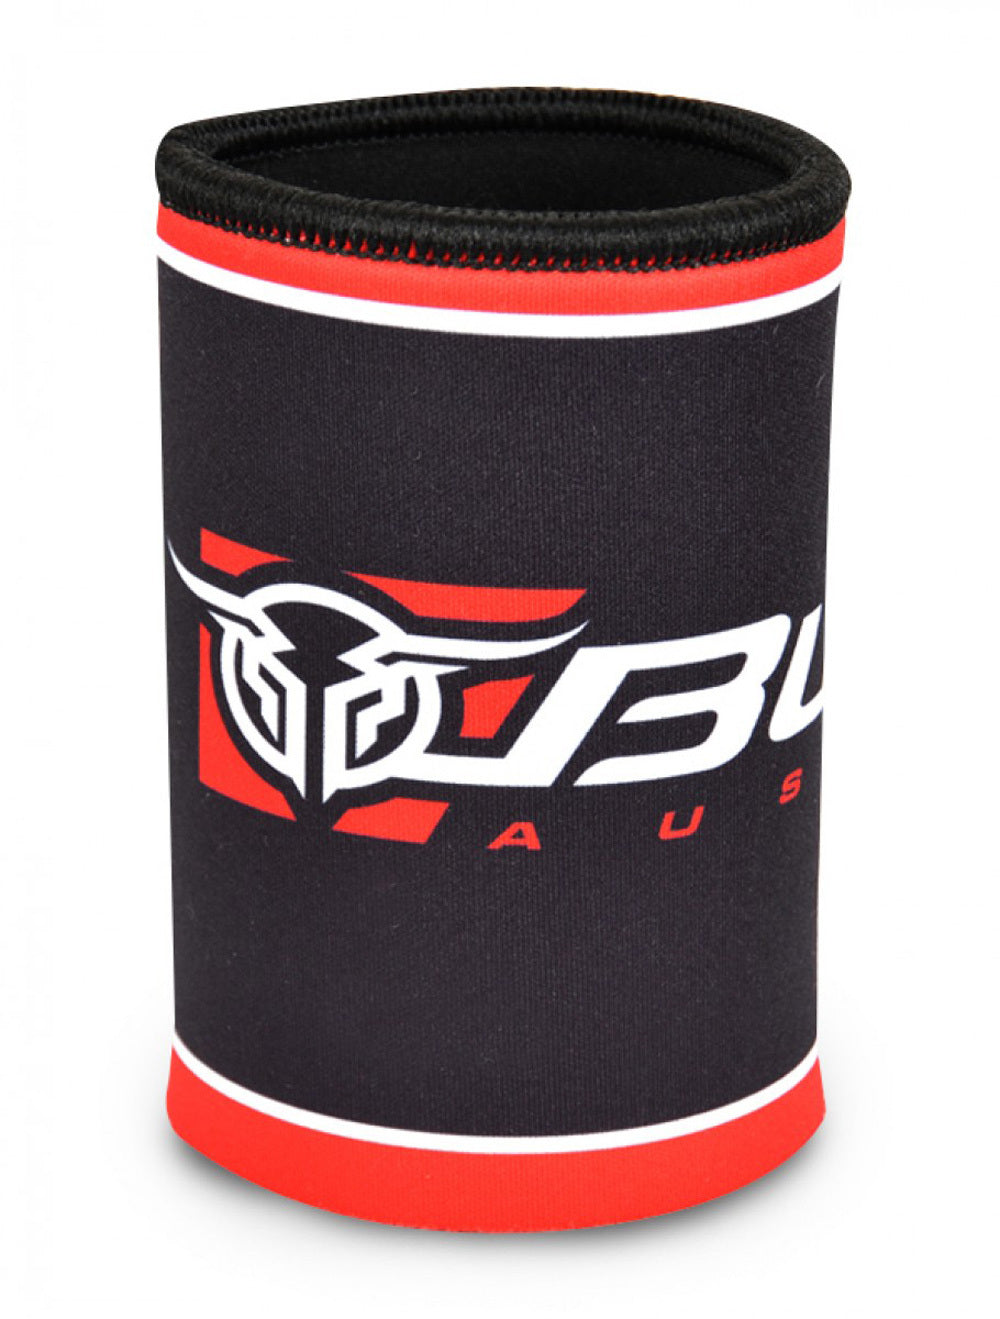 Bullzye Promo Stubby Holder - The Trading Stables